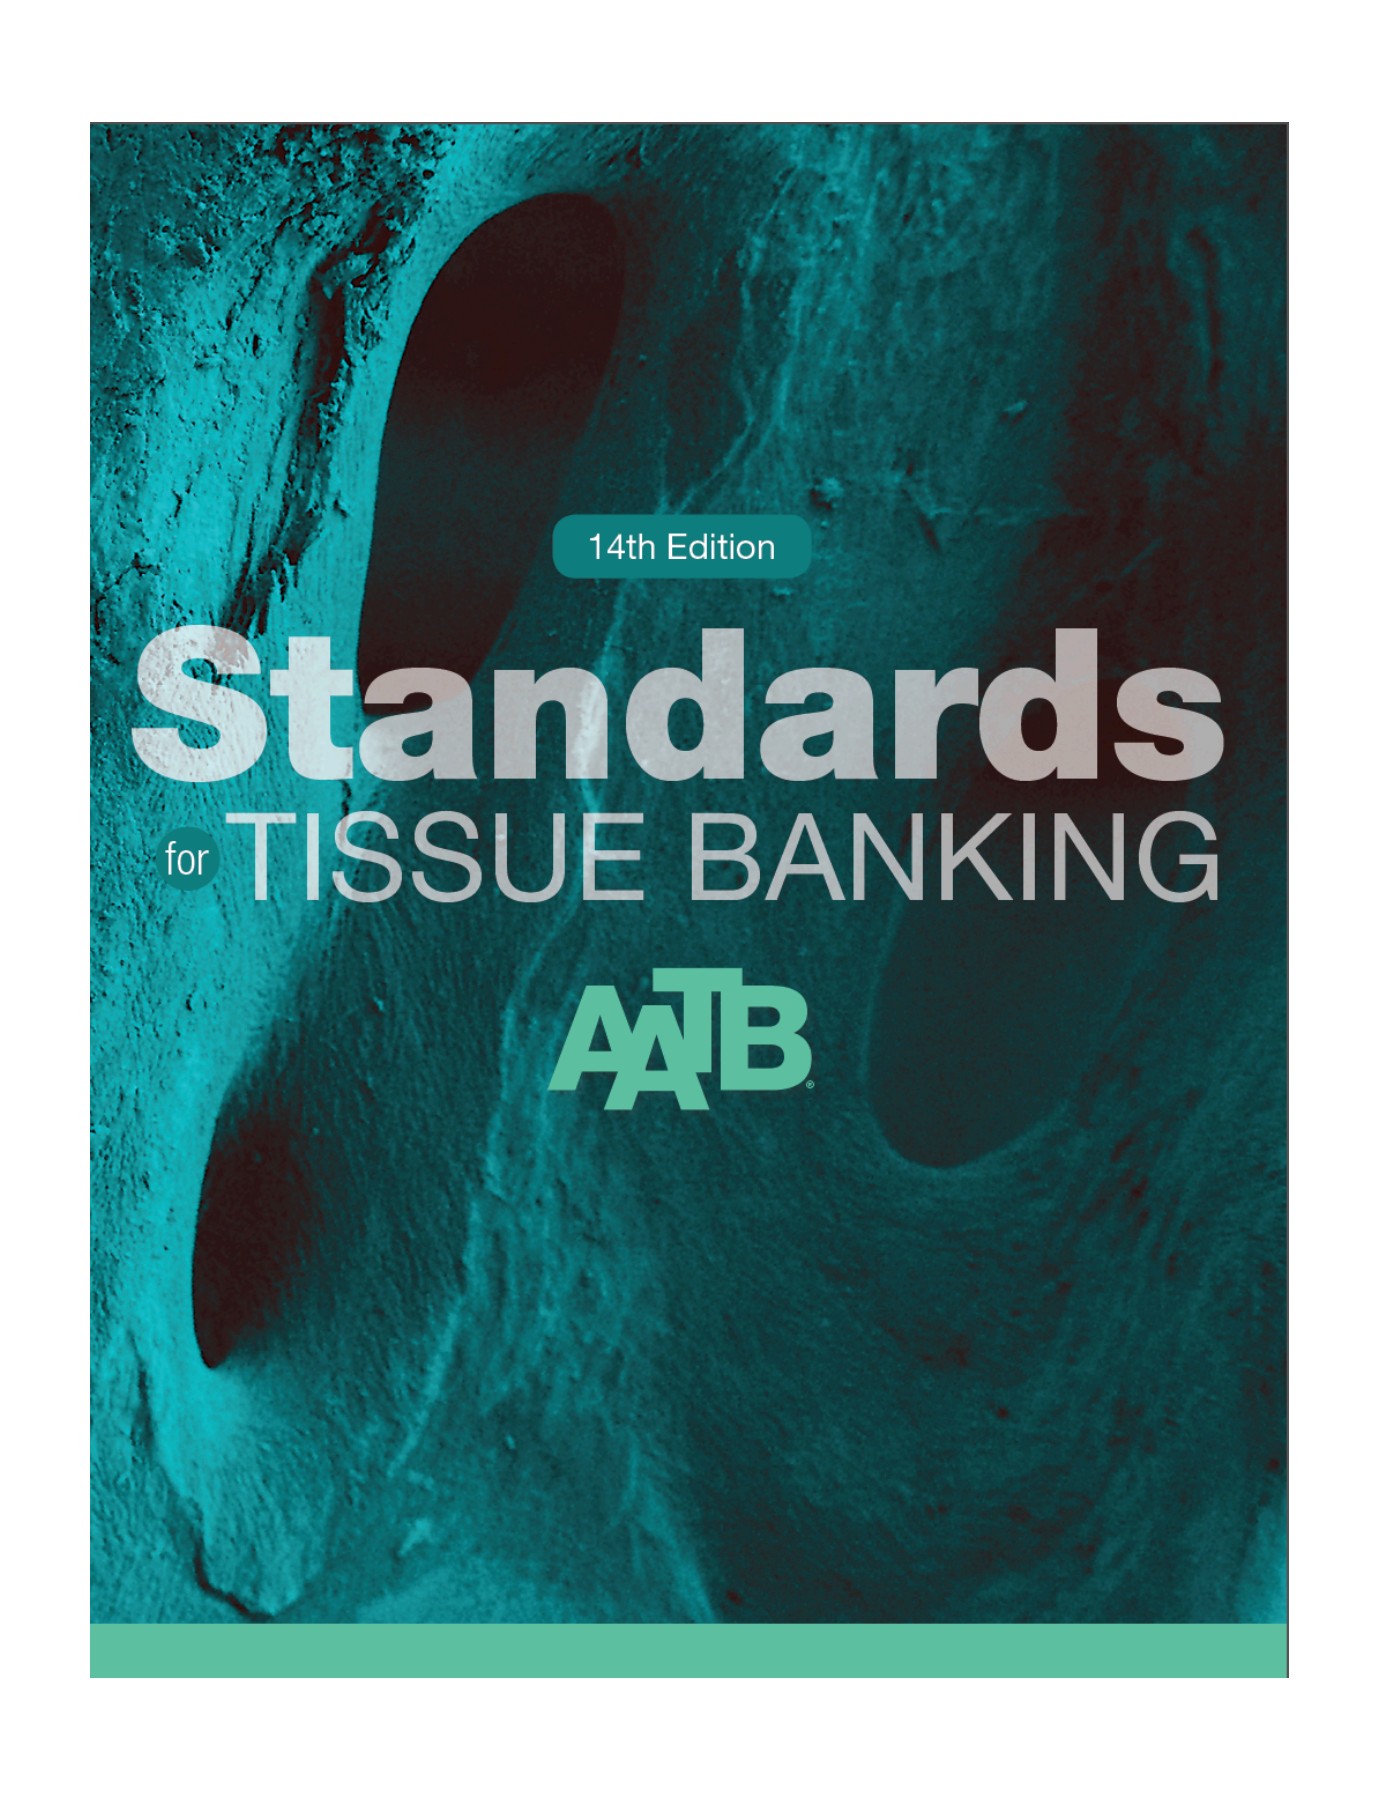 AATB Standards for Tissue Banking | American Association of Tissue Banks